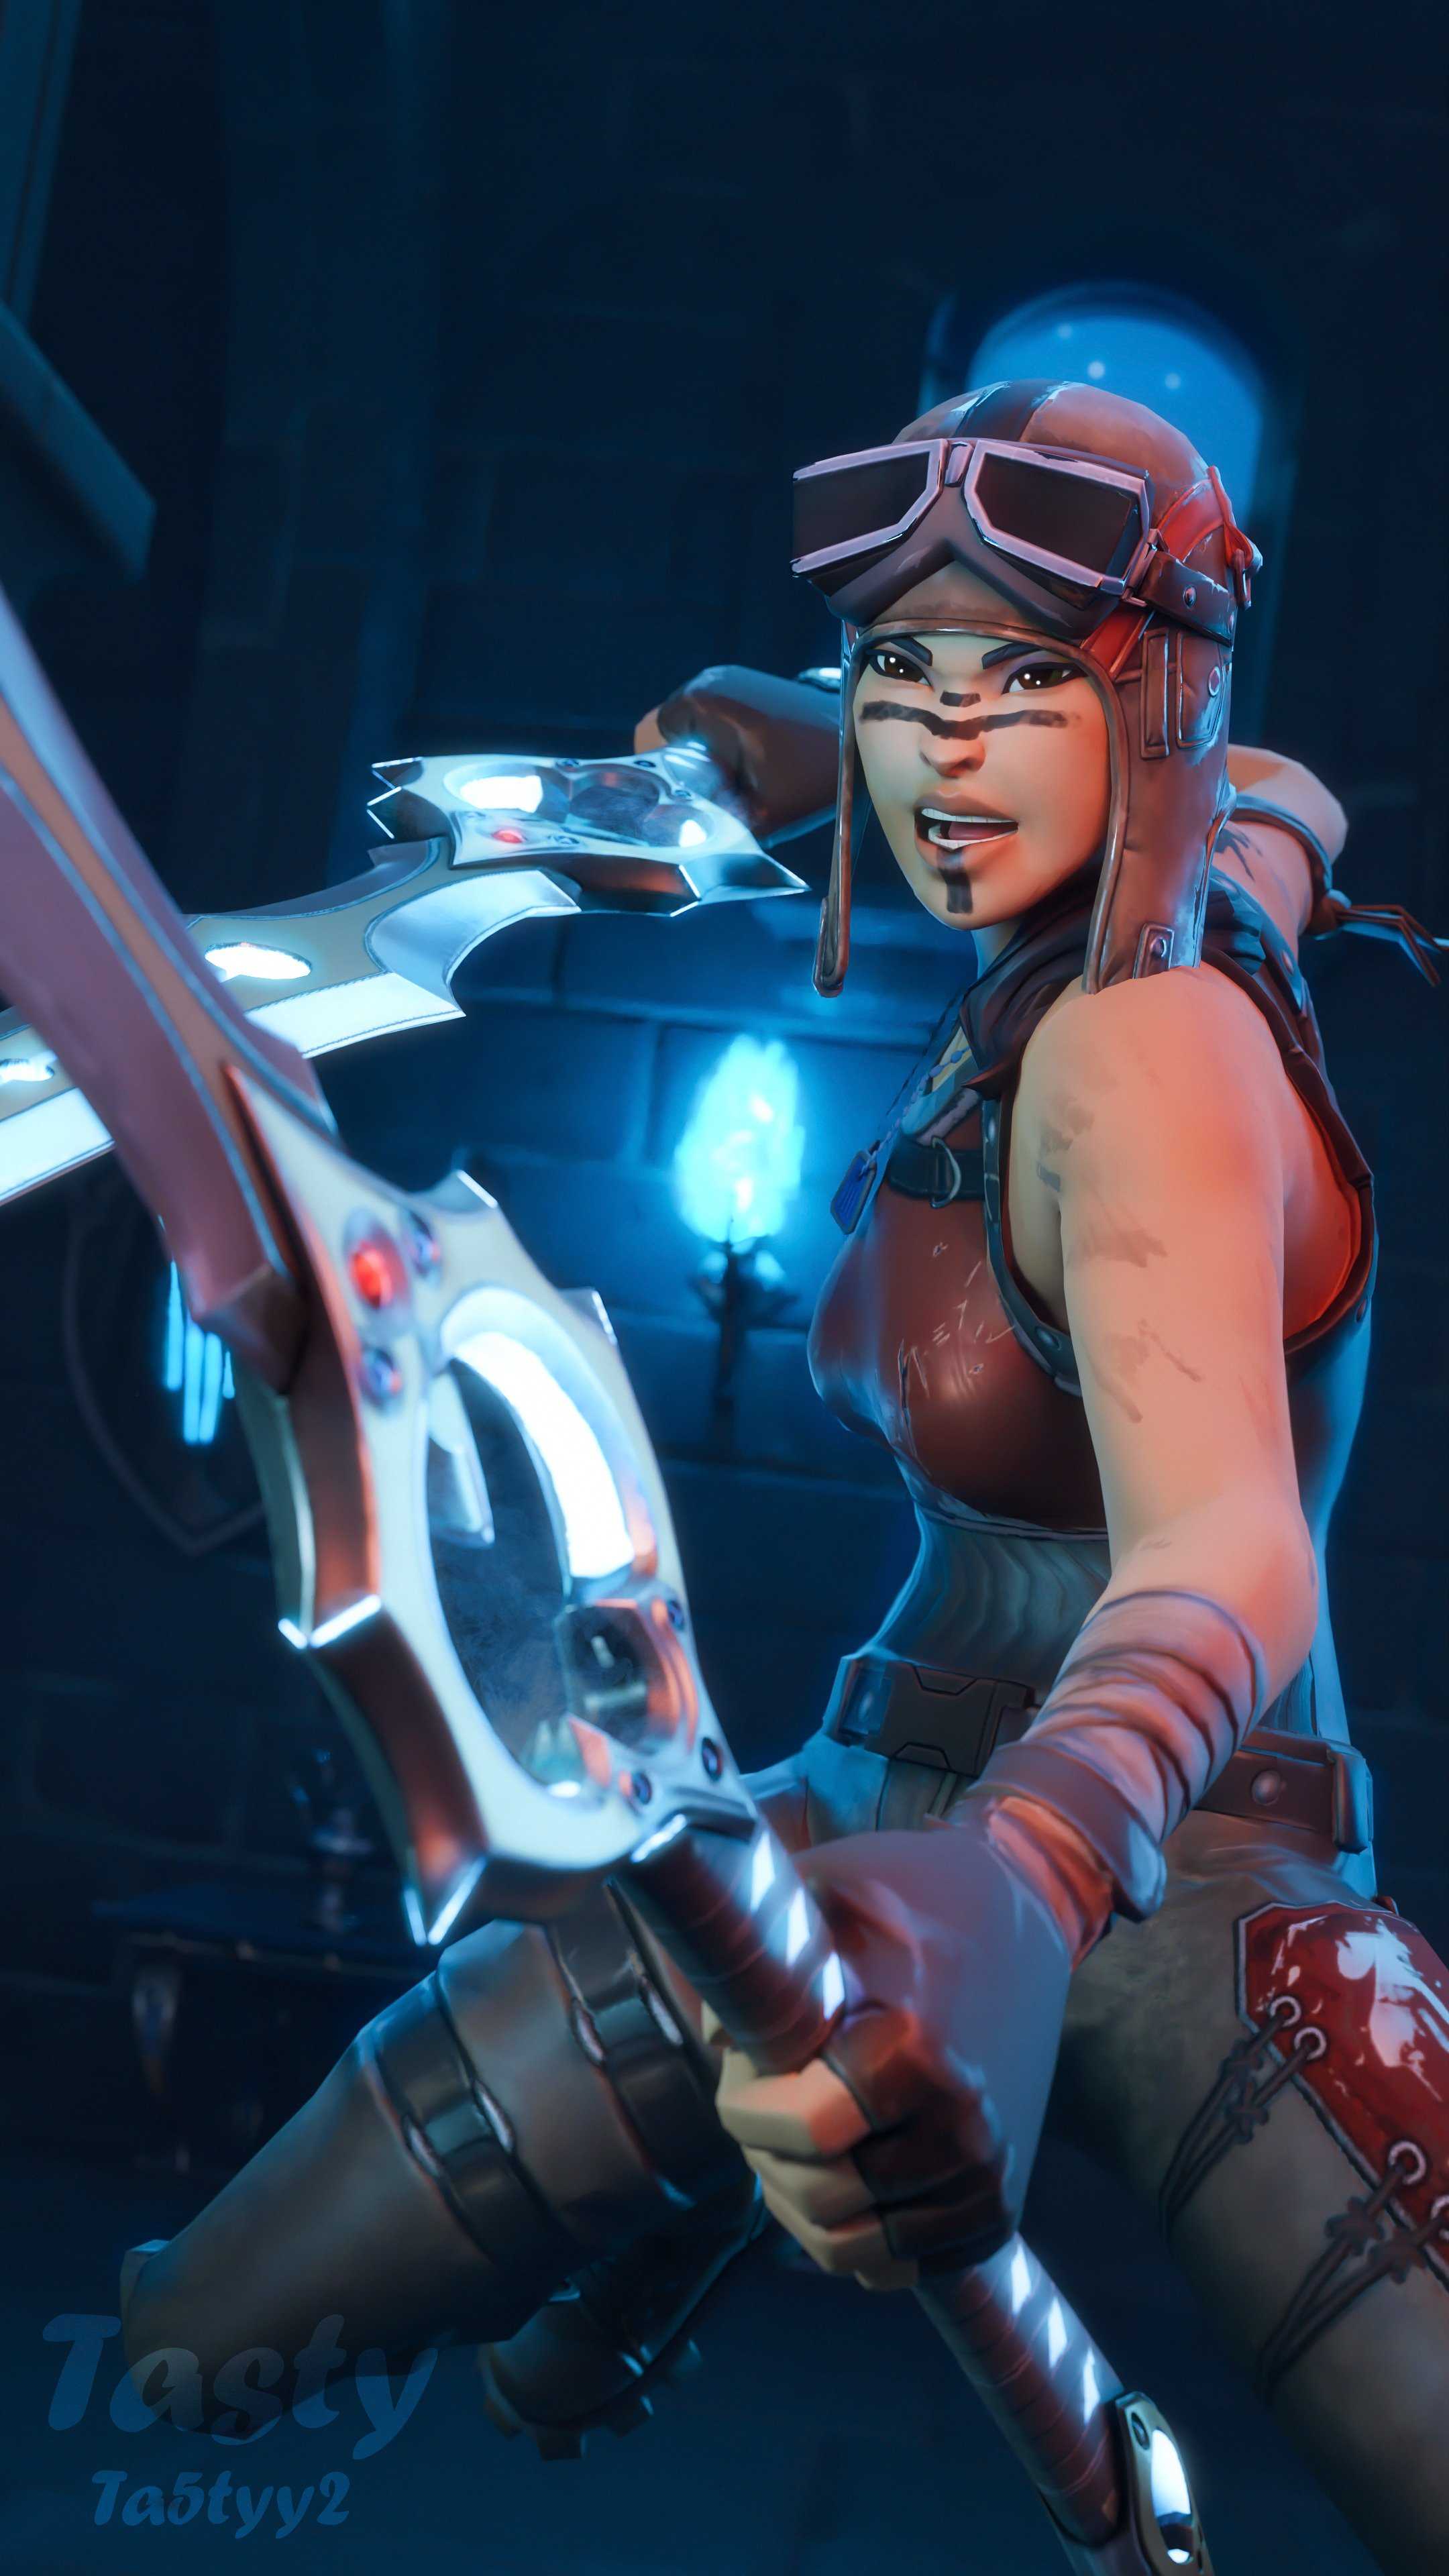 Renegade Raider wallpaper by Zachary200707  Download on ZEDGE  5591